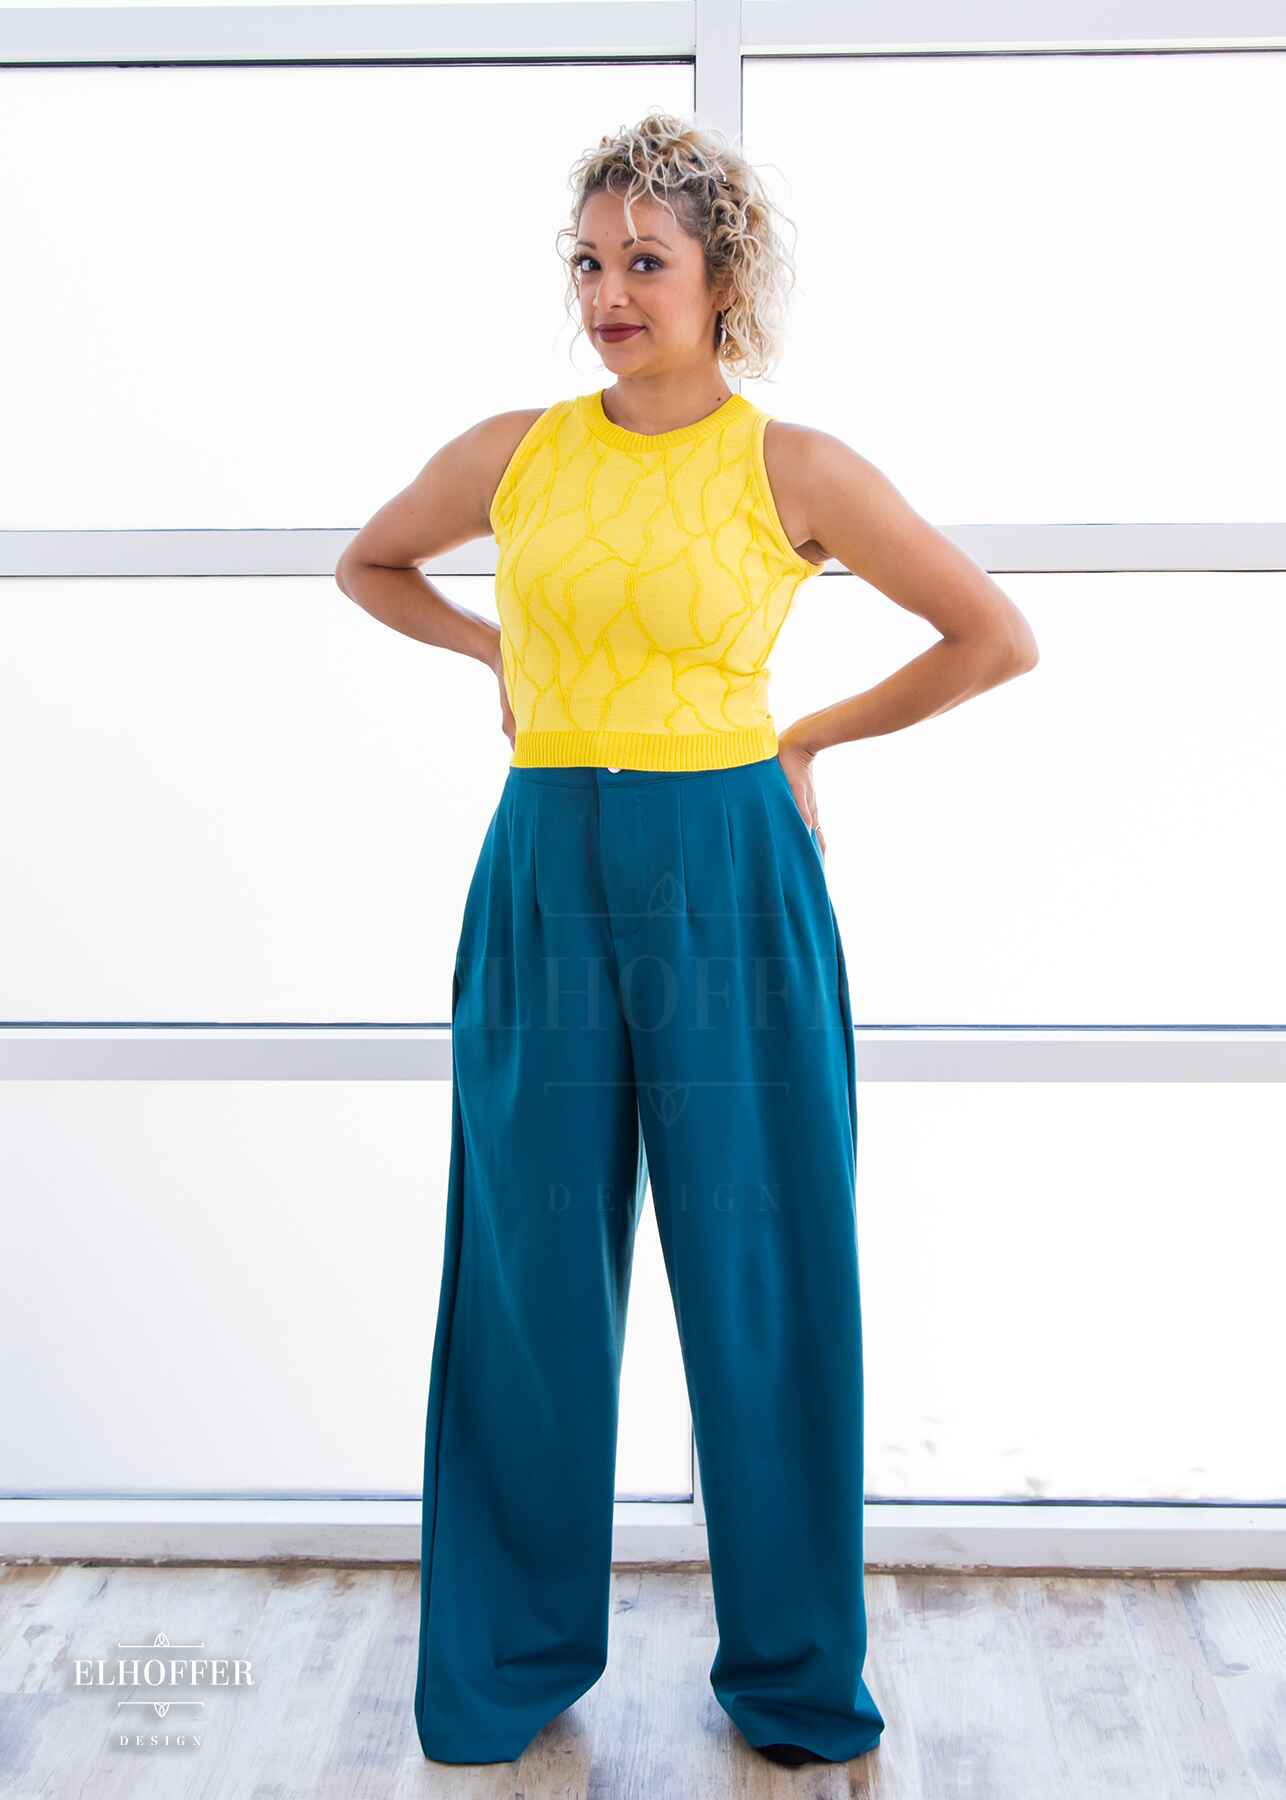 Simone, a light olive skinned S model with short curly platinum blonde hair, is wearing a bright yellow sleeveless knit crop top with a butterfly wing textured pattern. She paired the crop top with peacock teal trousers.